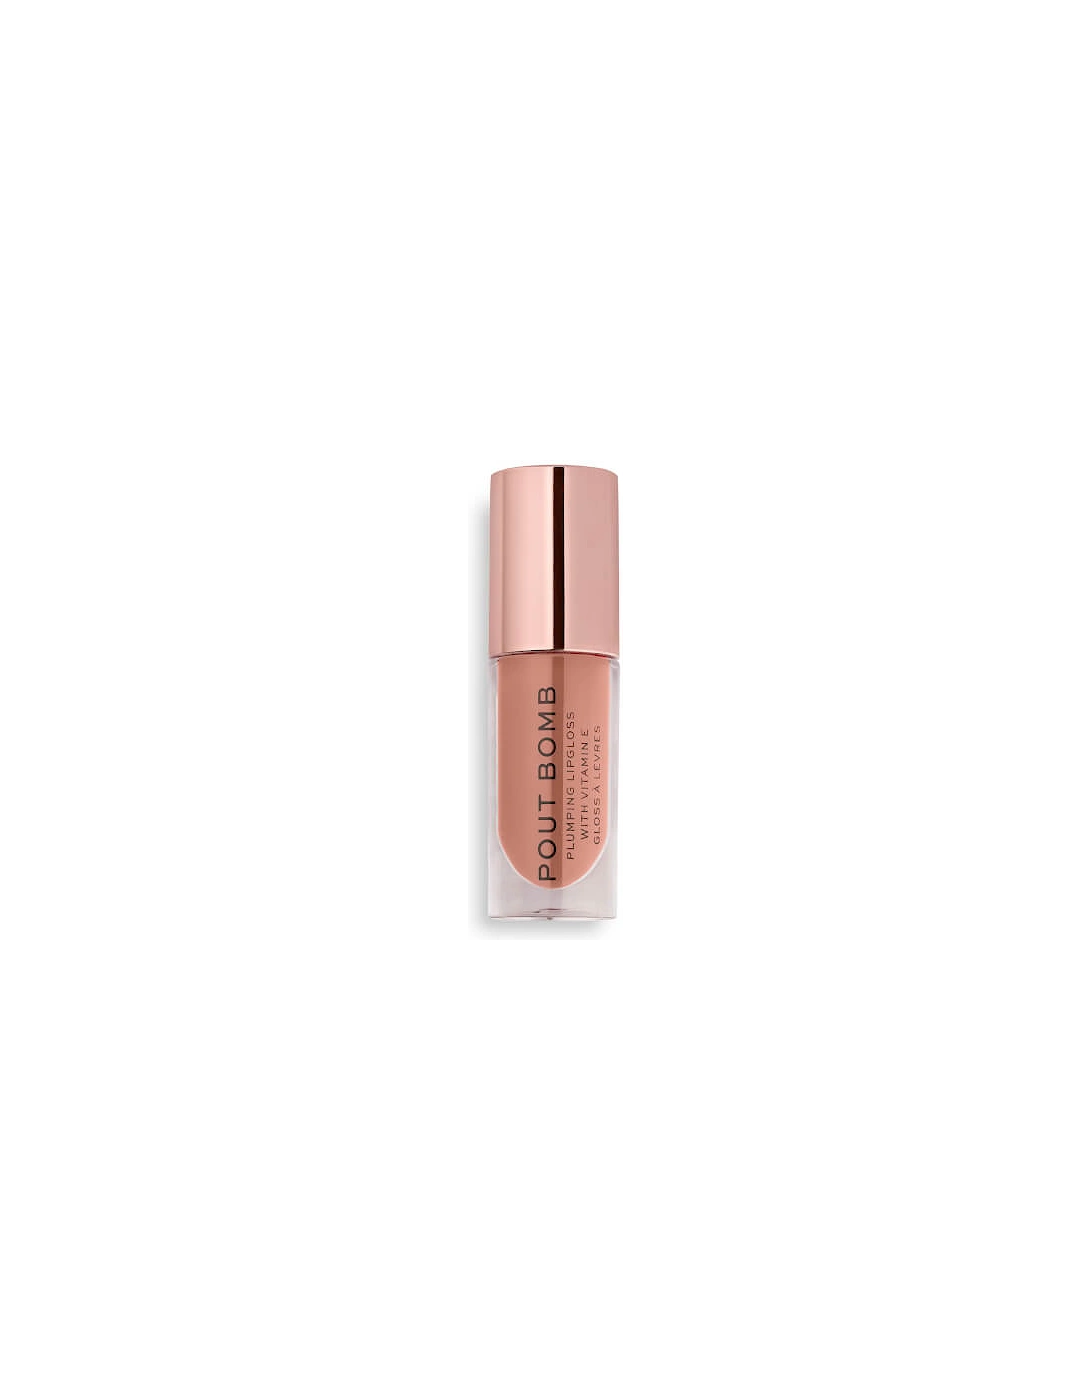 Makeup Pout Bomb Plumping Gloss Candy, 2 of 1